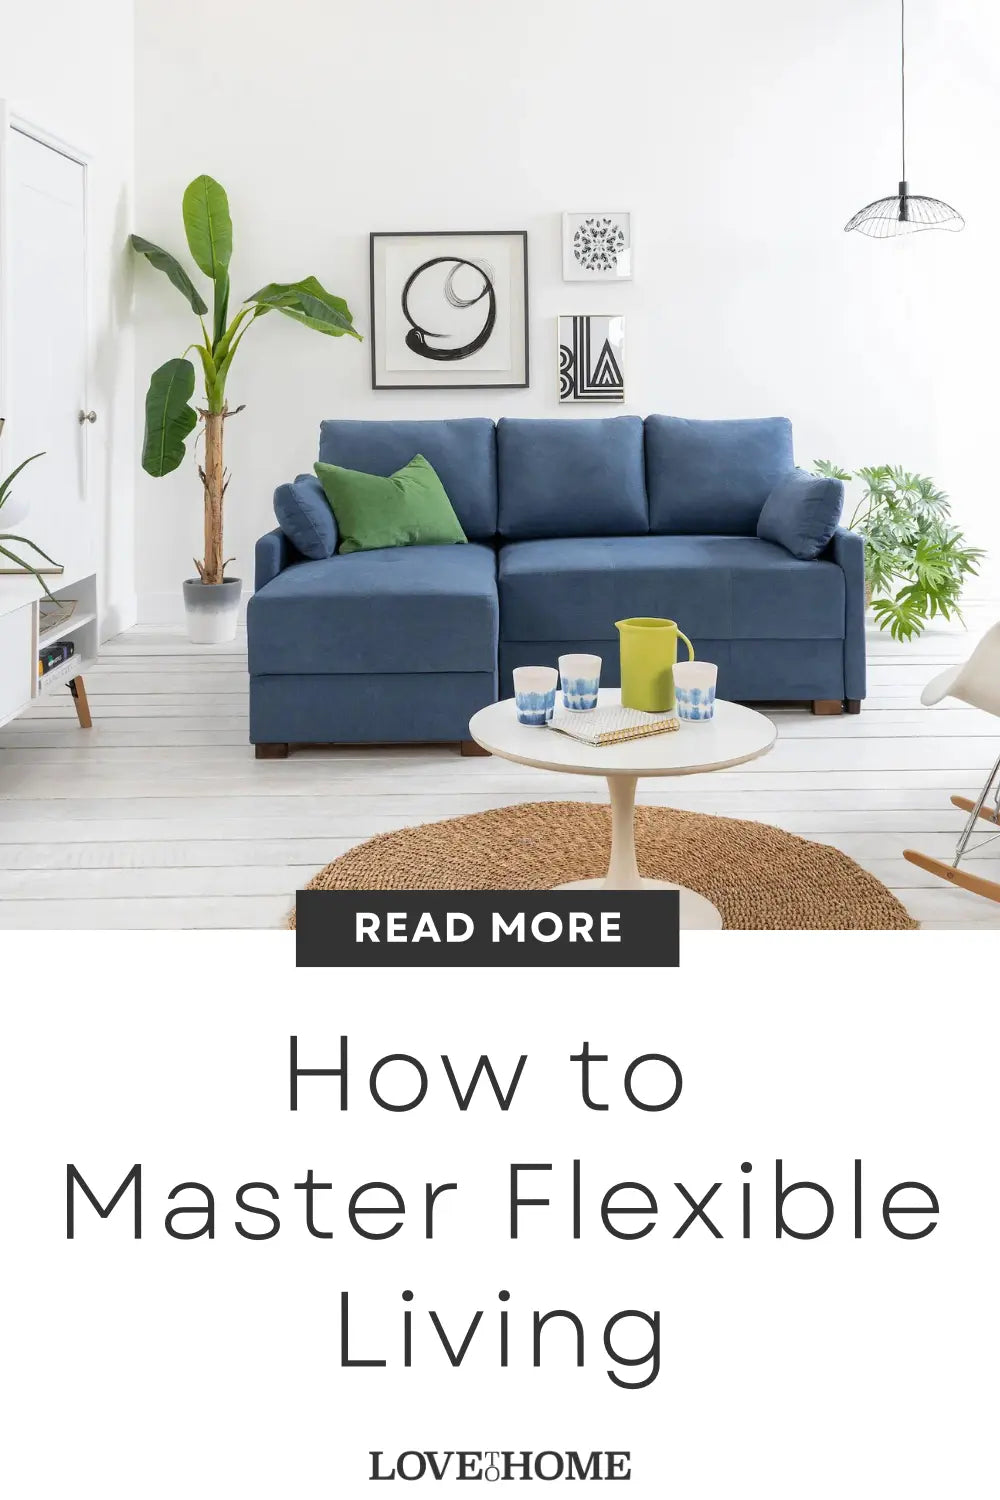 How to Master Flexible Living